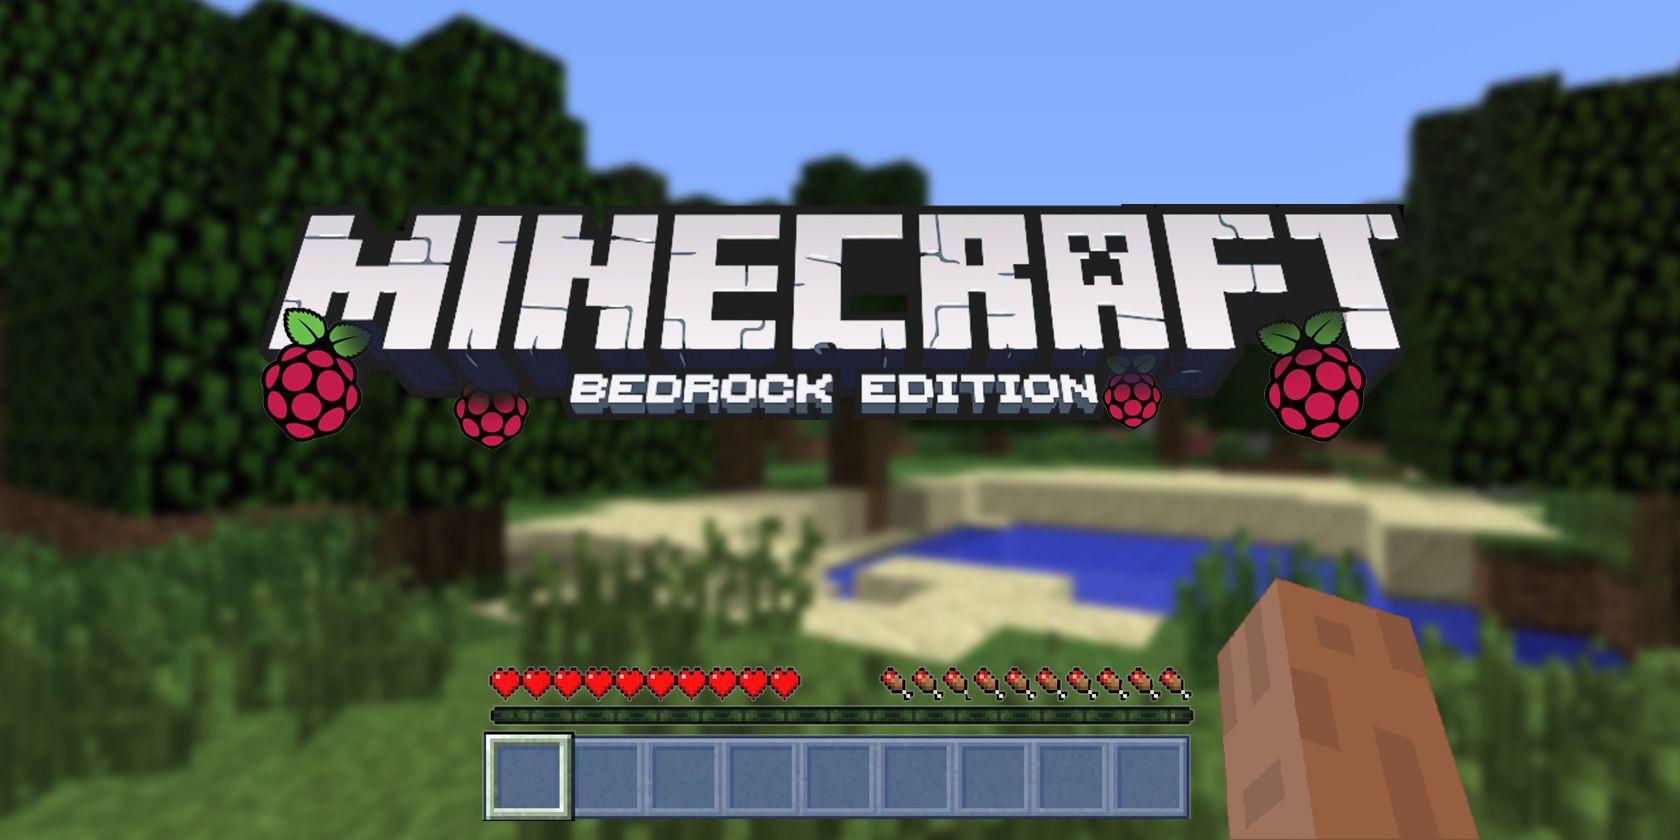 Minecraft Bedrock Server Out Now